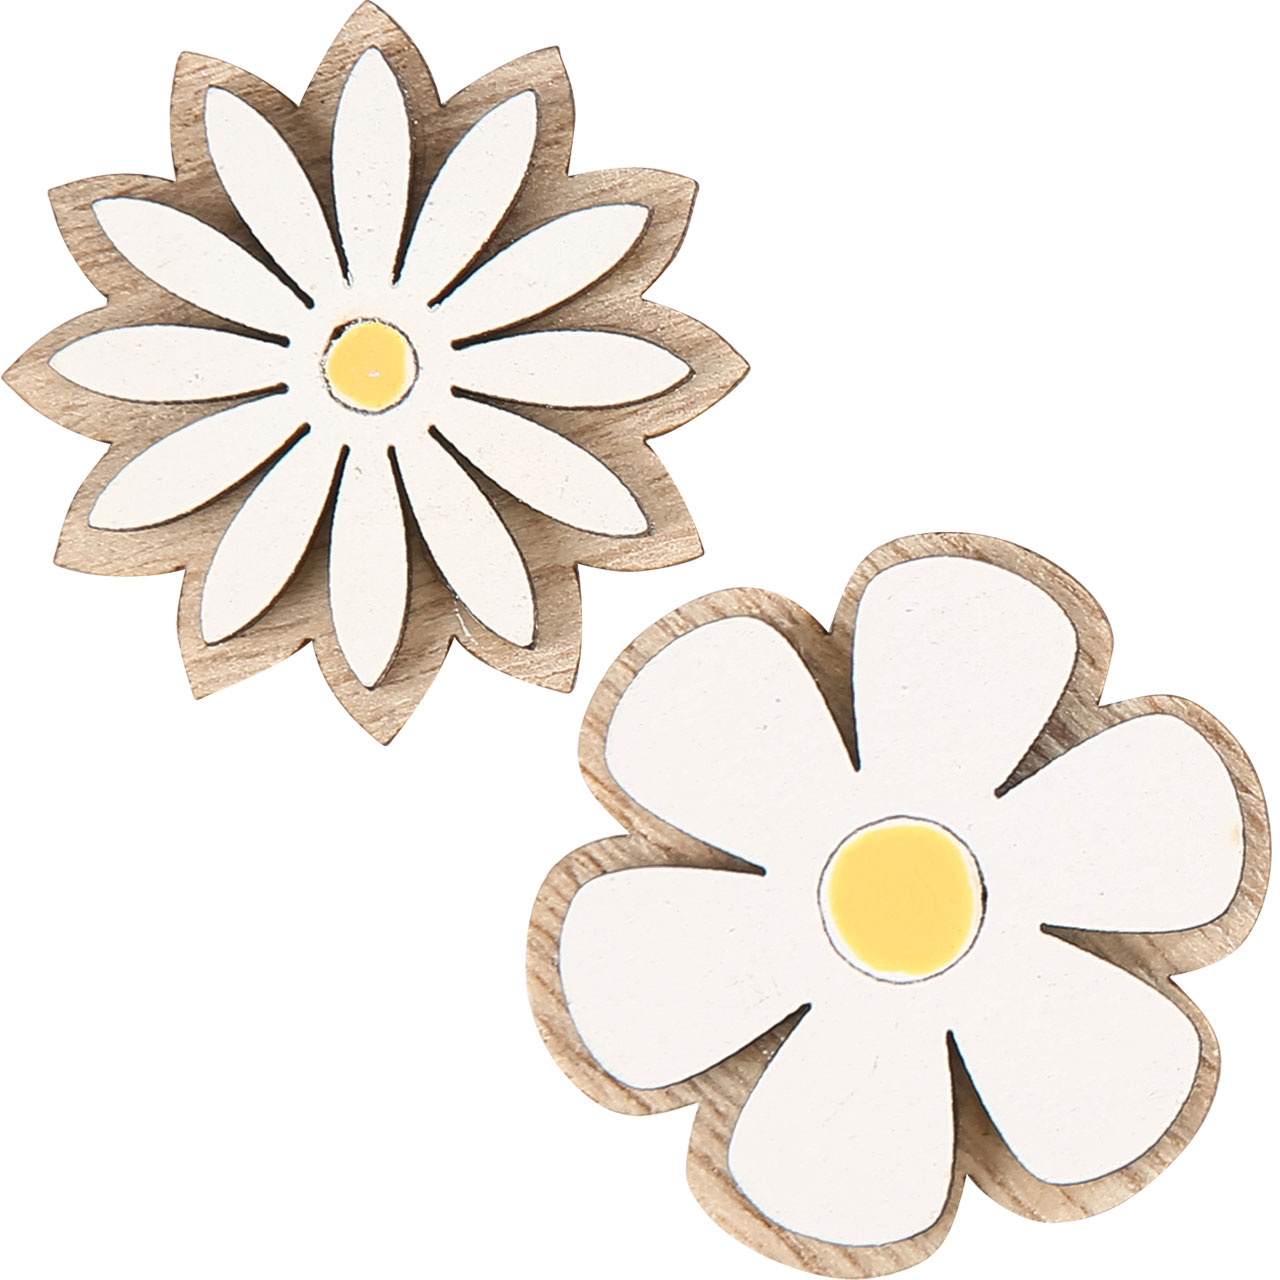 Stickers - Wooden Daisy Stickers